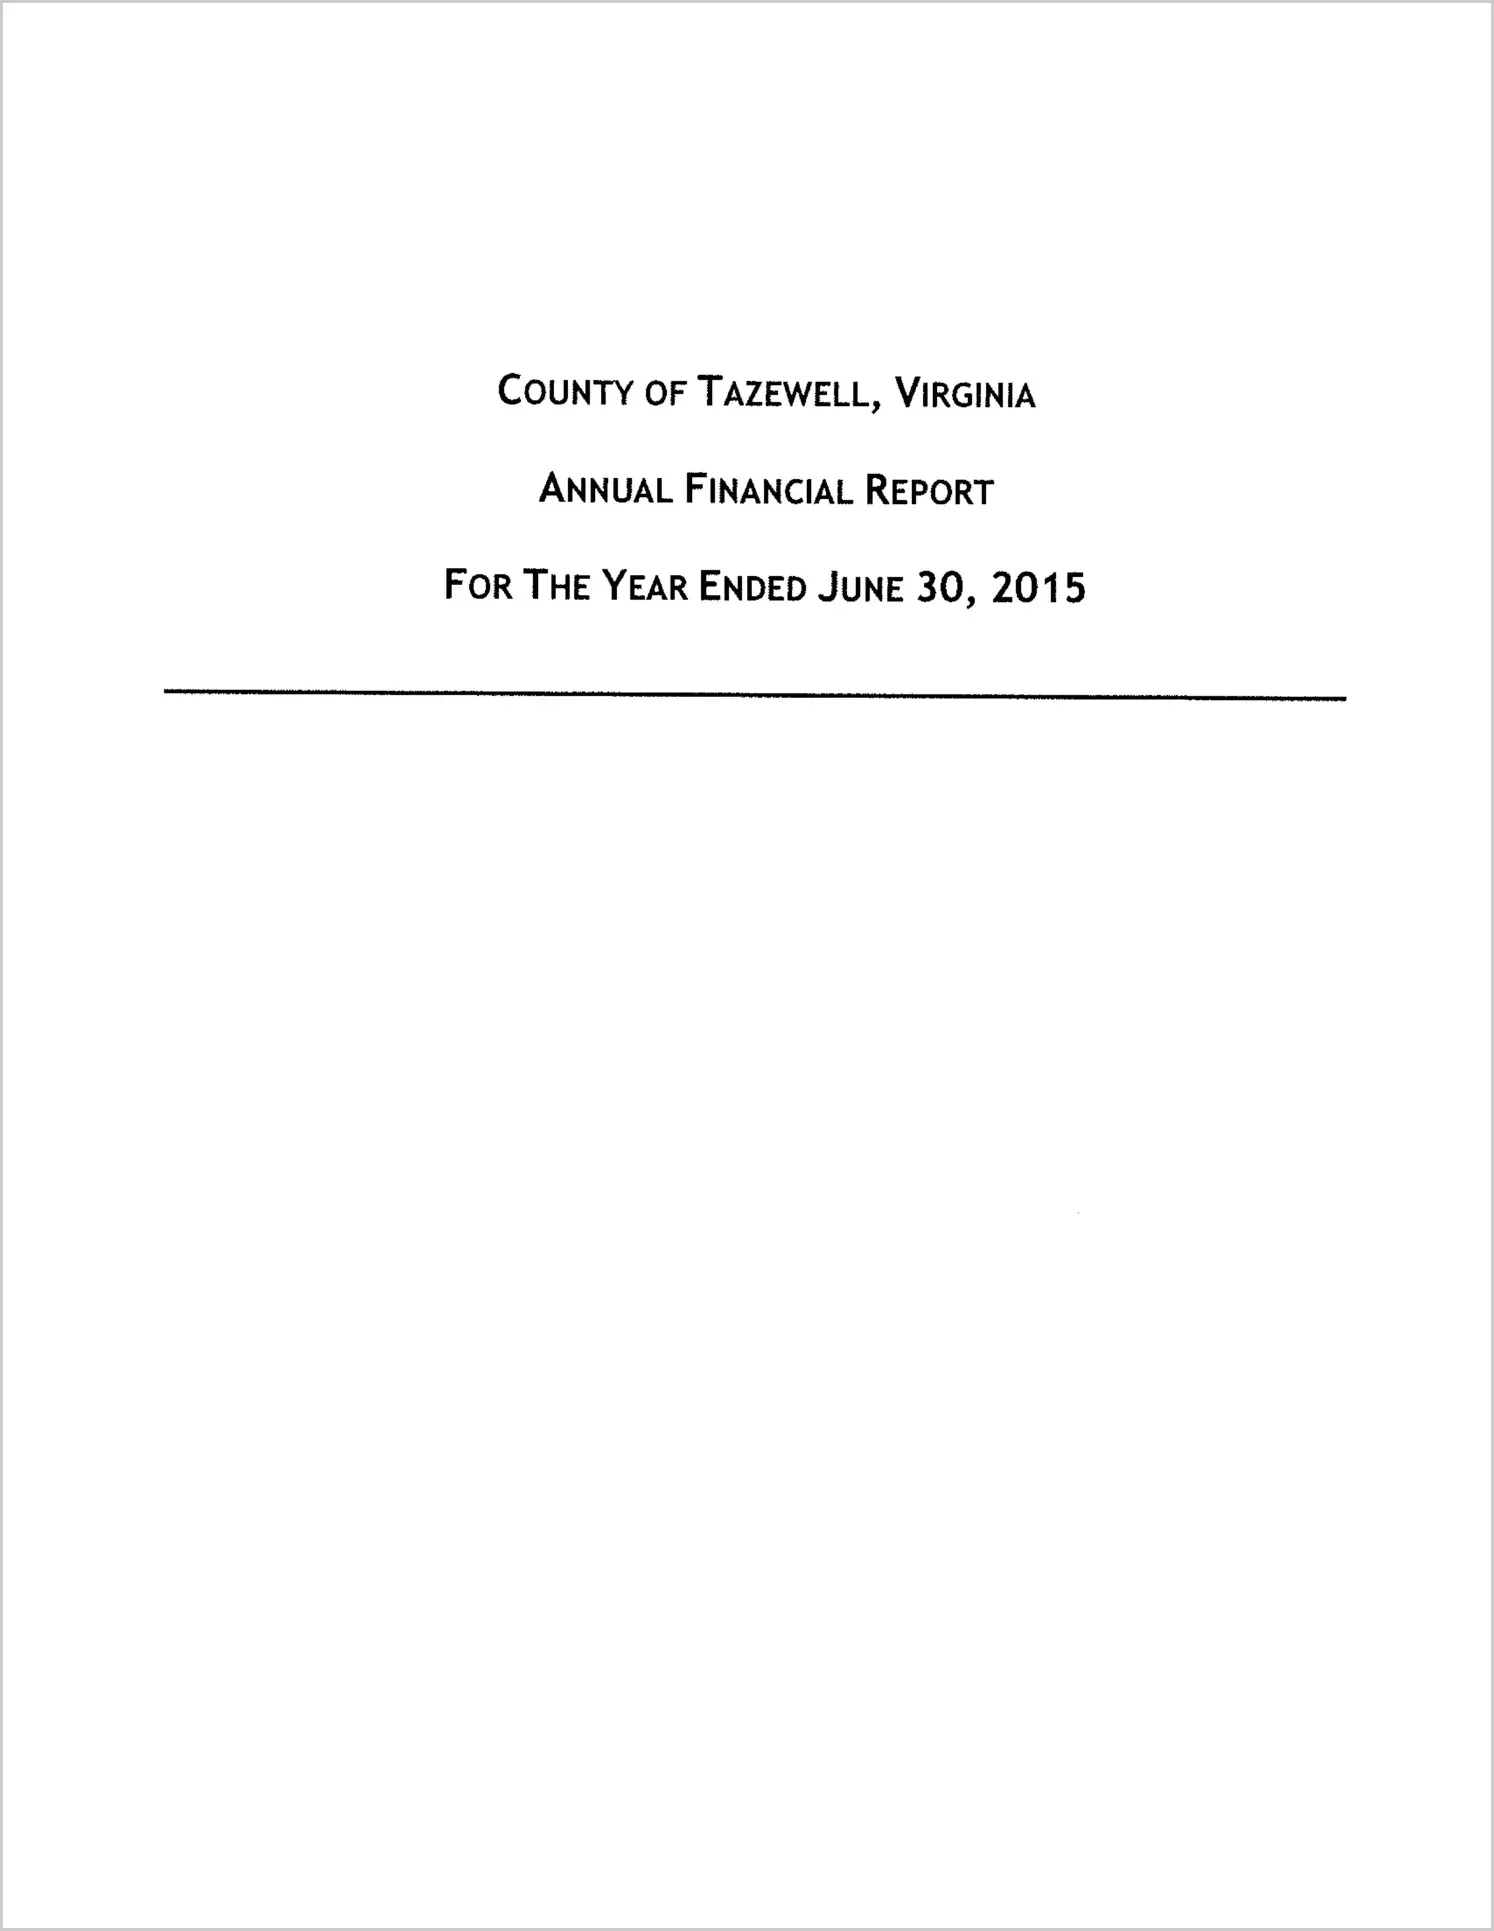 2015 Annual Financial Report for County of Tazewell